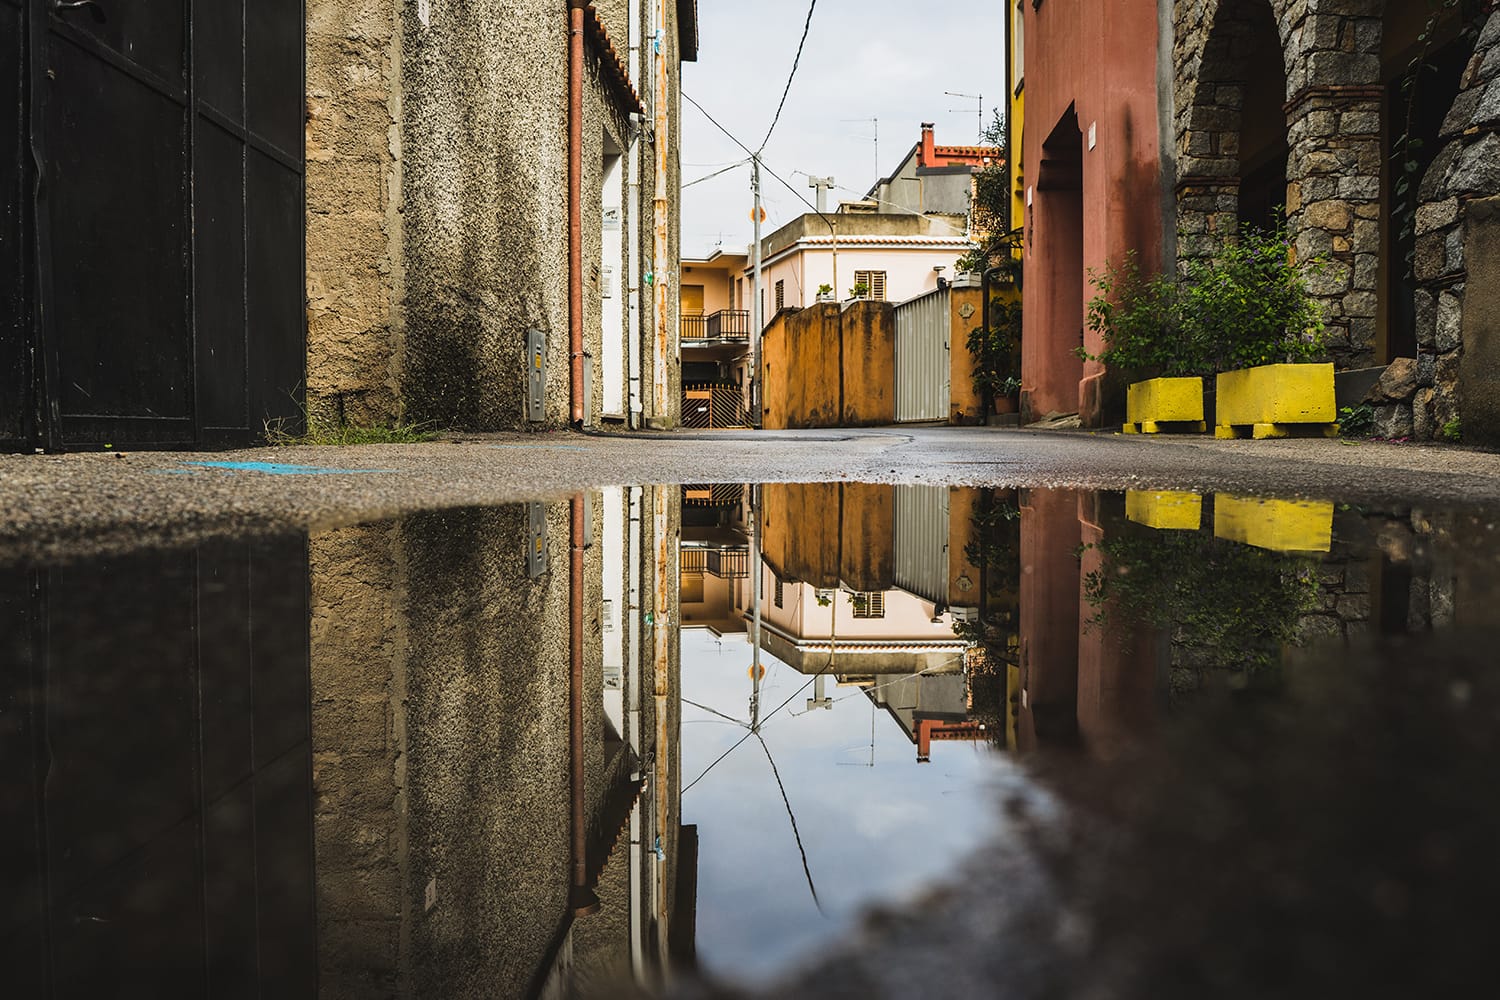 8 Great Tips and Tricks for Taking Awesome Puddle Photos